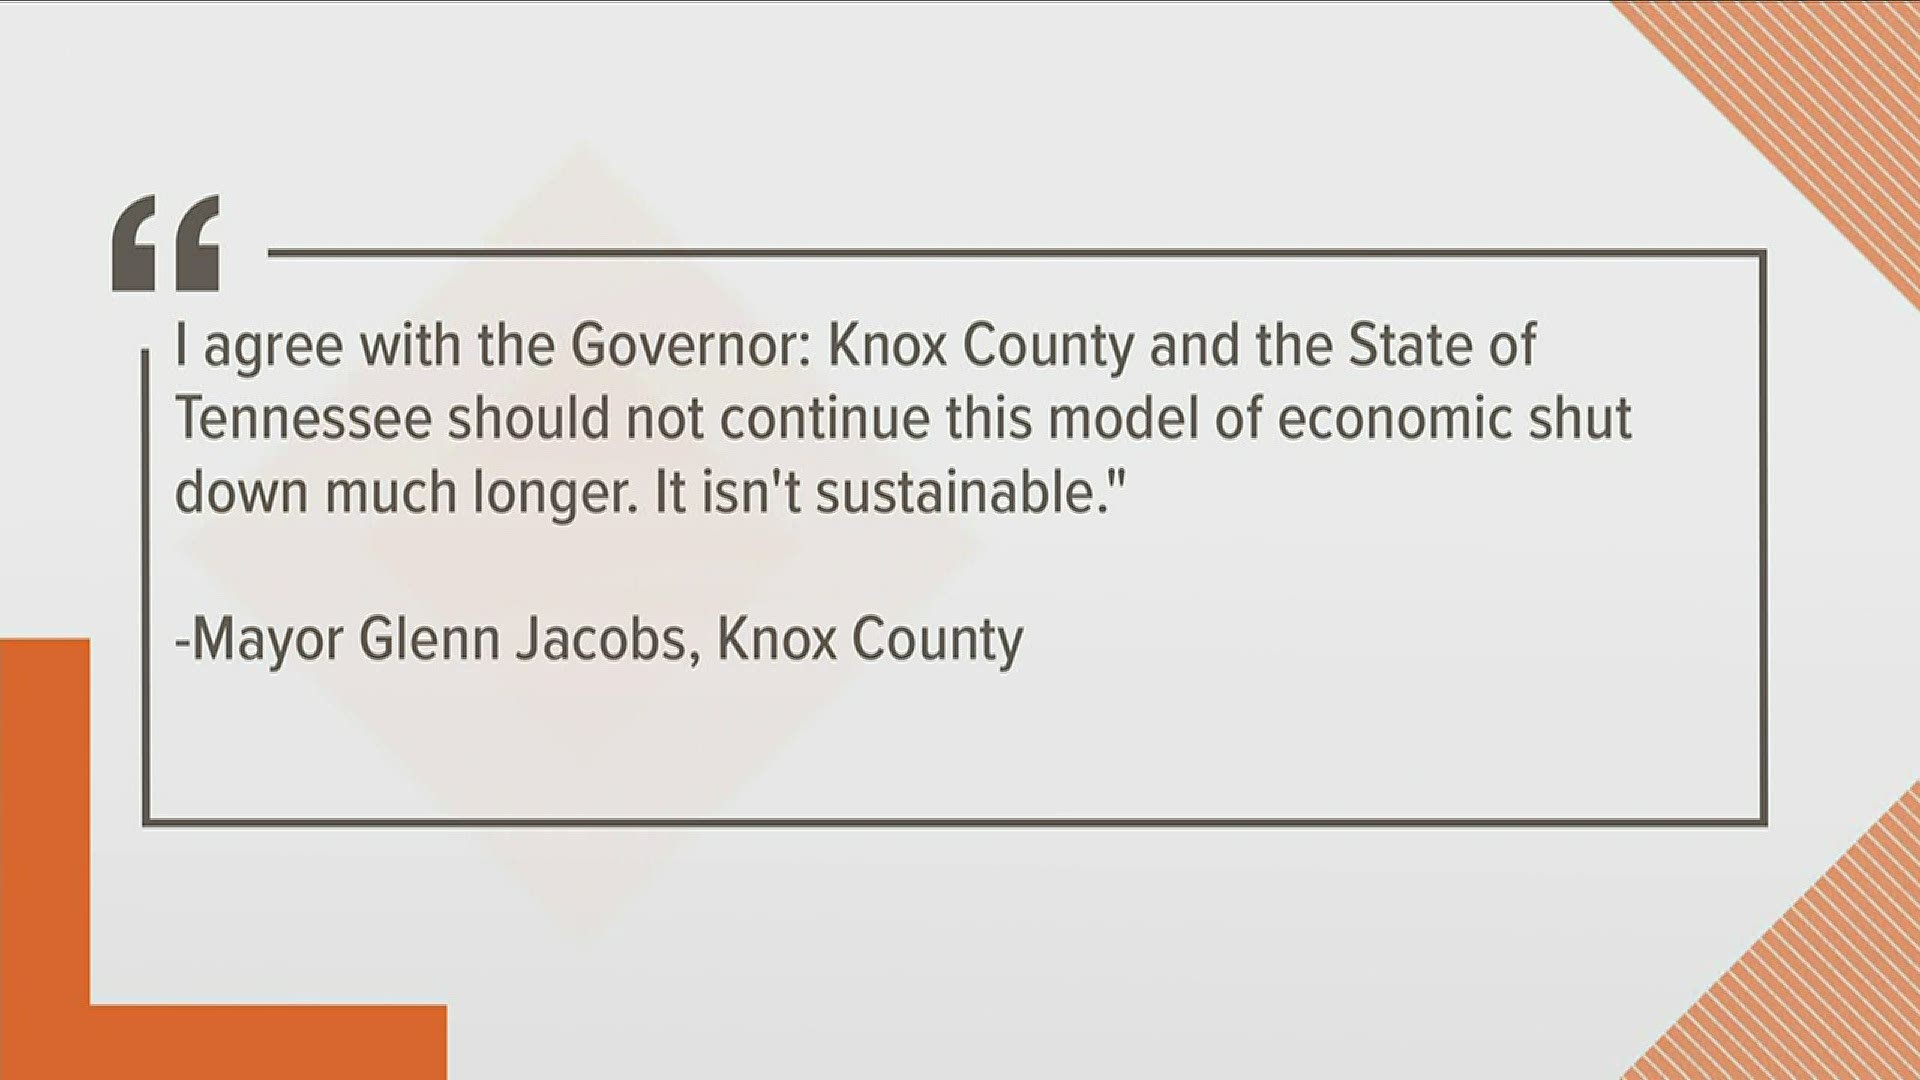 Knox County Mayor Glenn Jacobs says he understands the governor's decision but also emphasizes the economic shutdown is not sustainable.